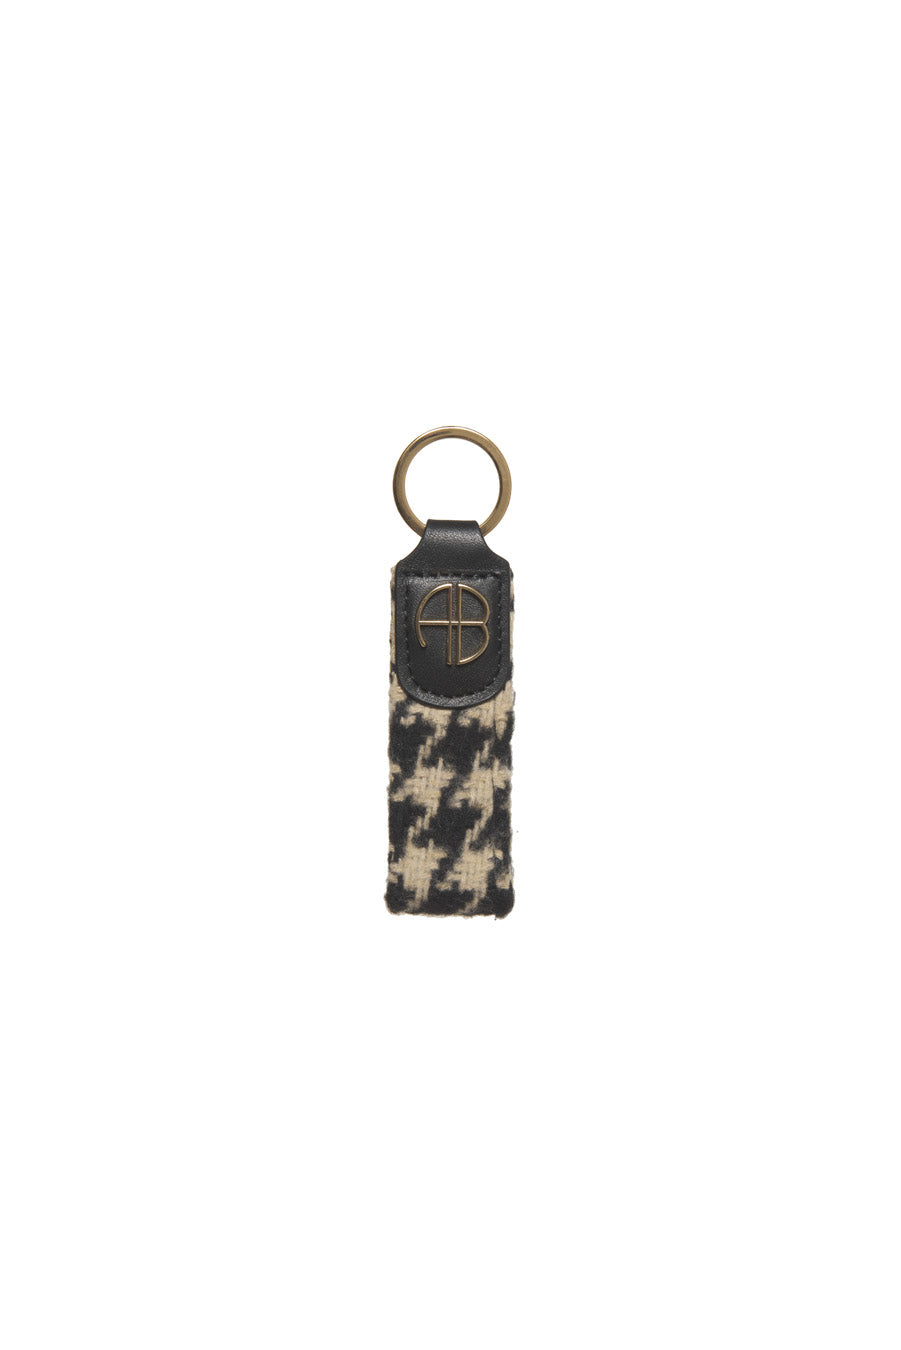 Anine Bing - AB Key Chain in Houndstooth